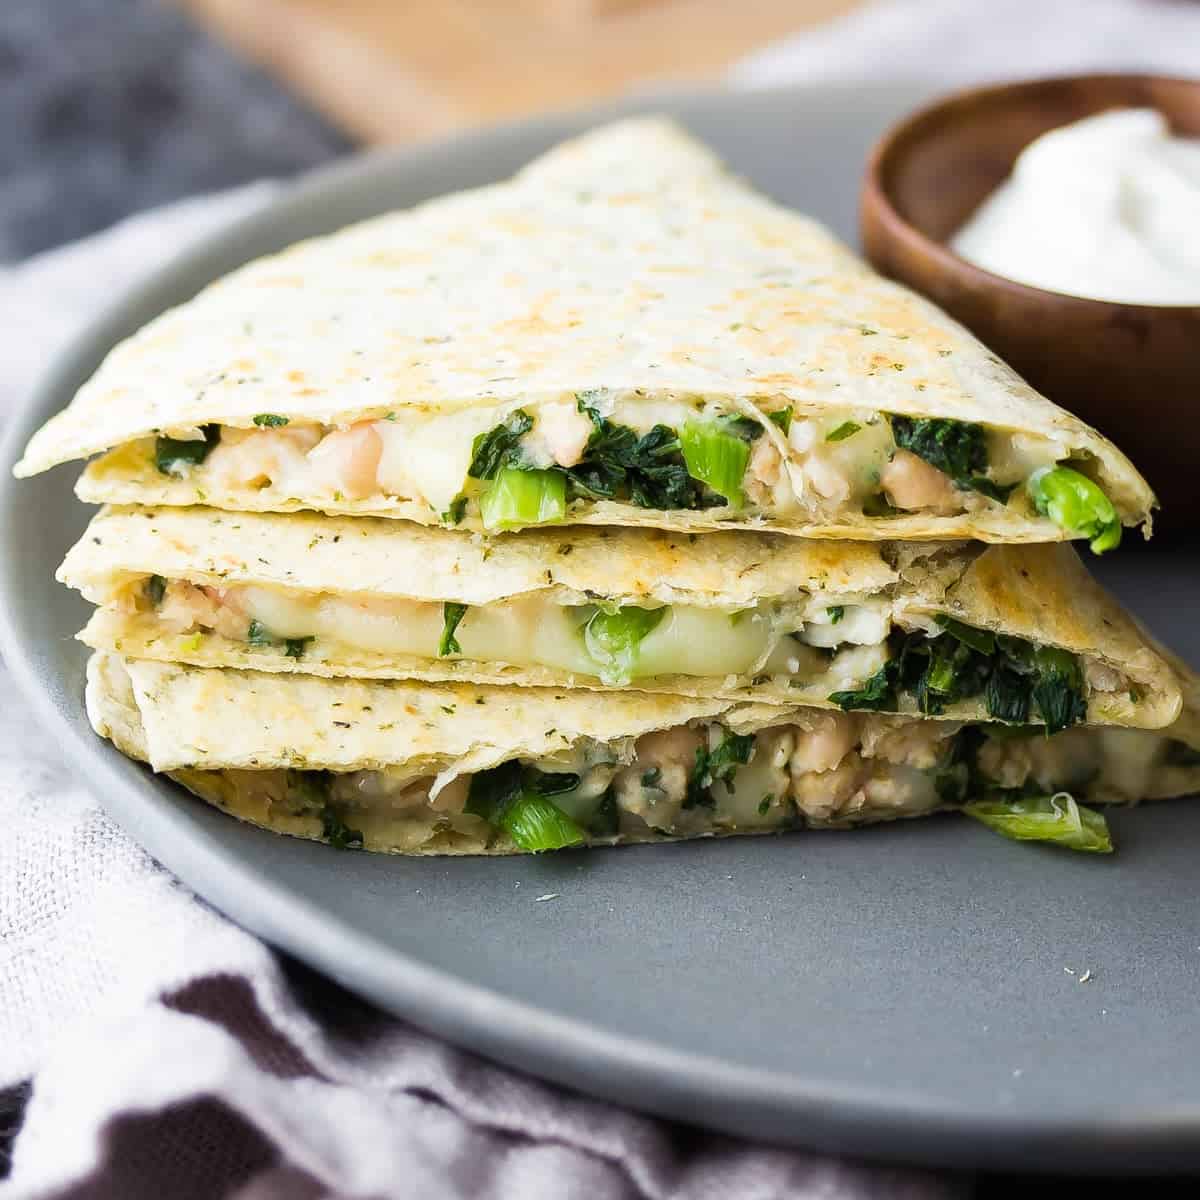 Stack of three Smashed White Bean and Spinach Quesadillas on gray plate with side of yogurt